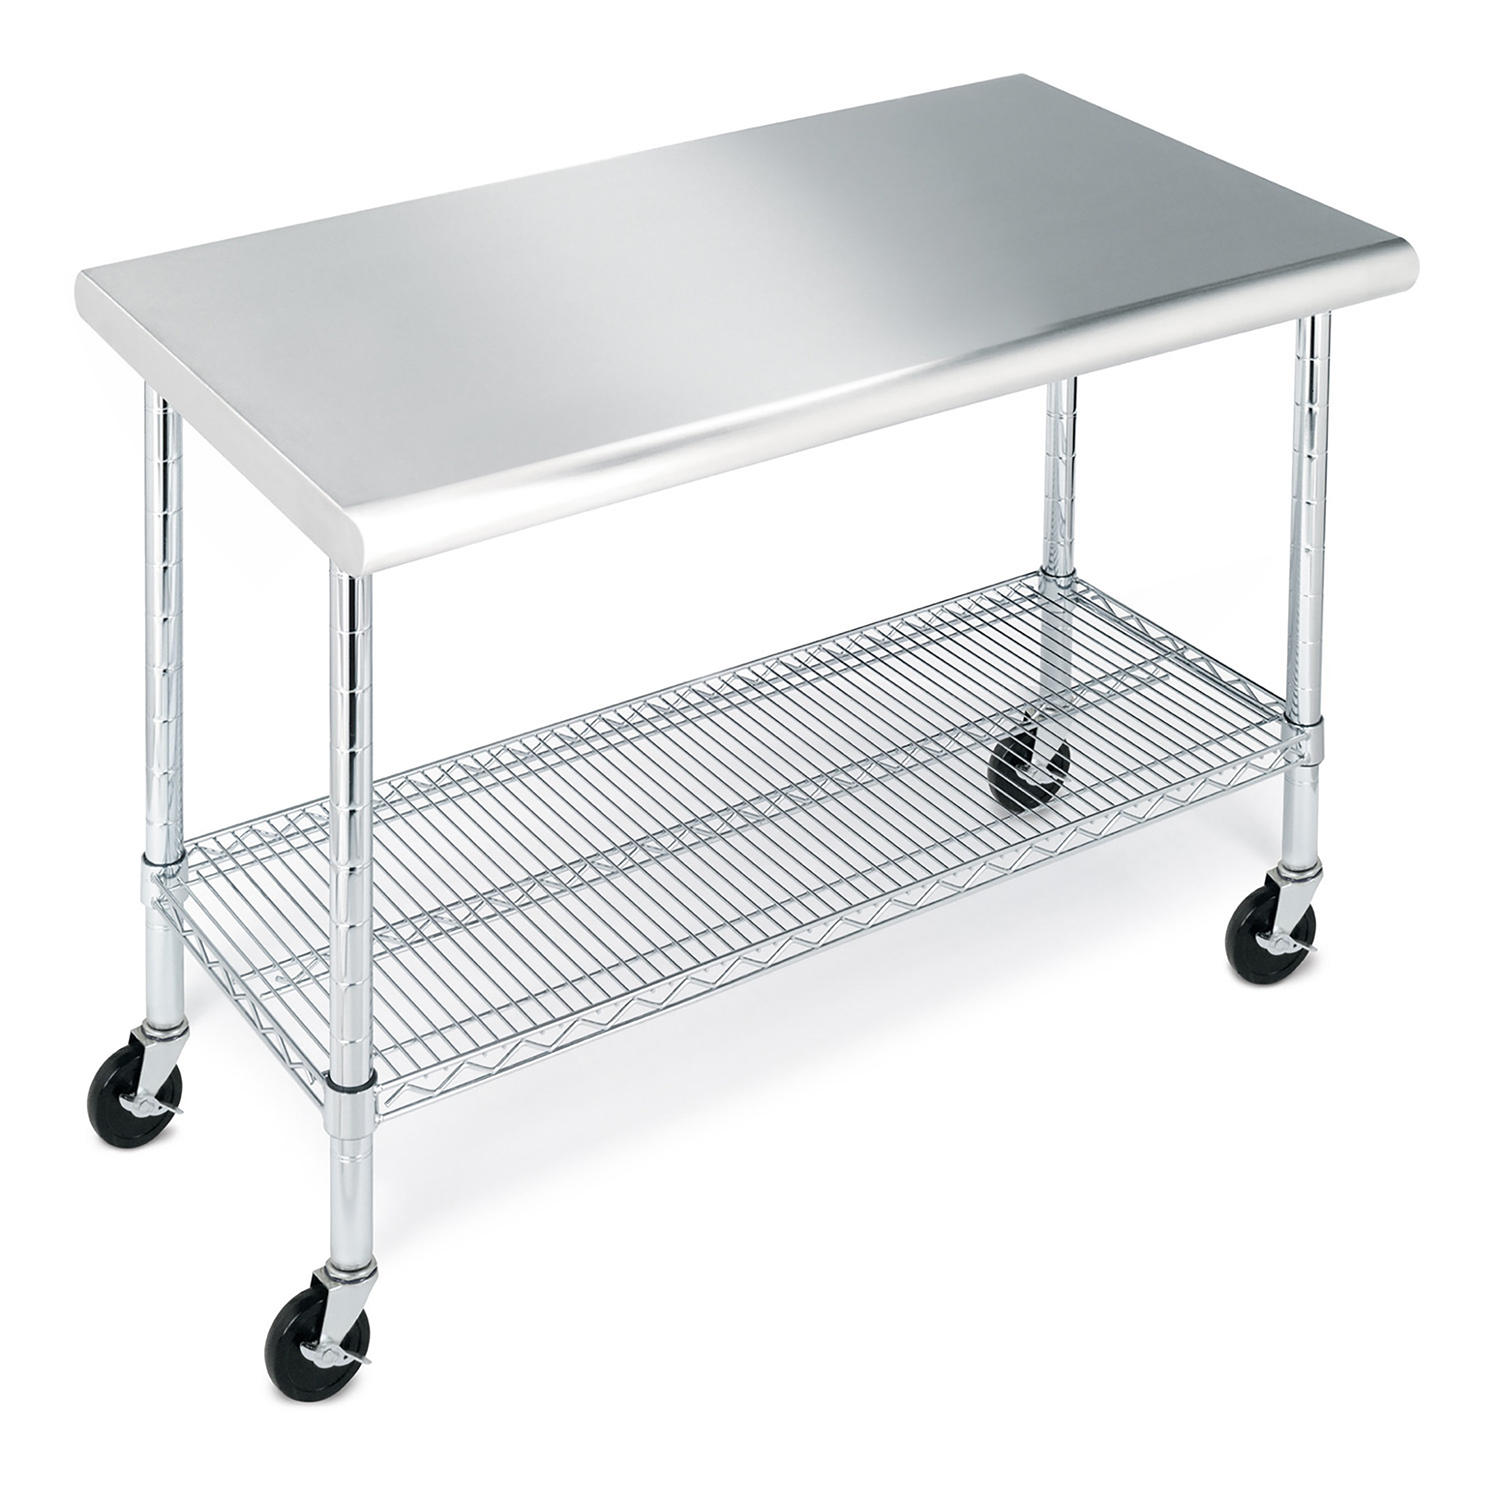 Member's Mark Work Table with 49' Stainless Steel Top